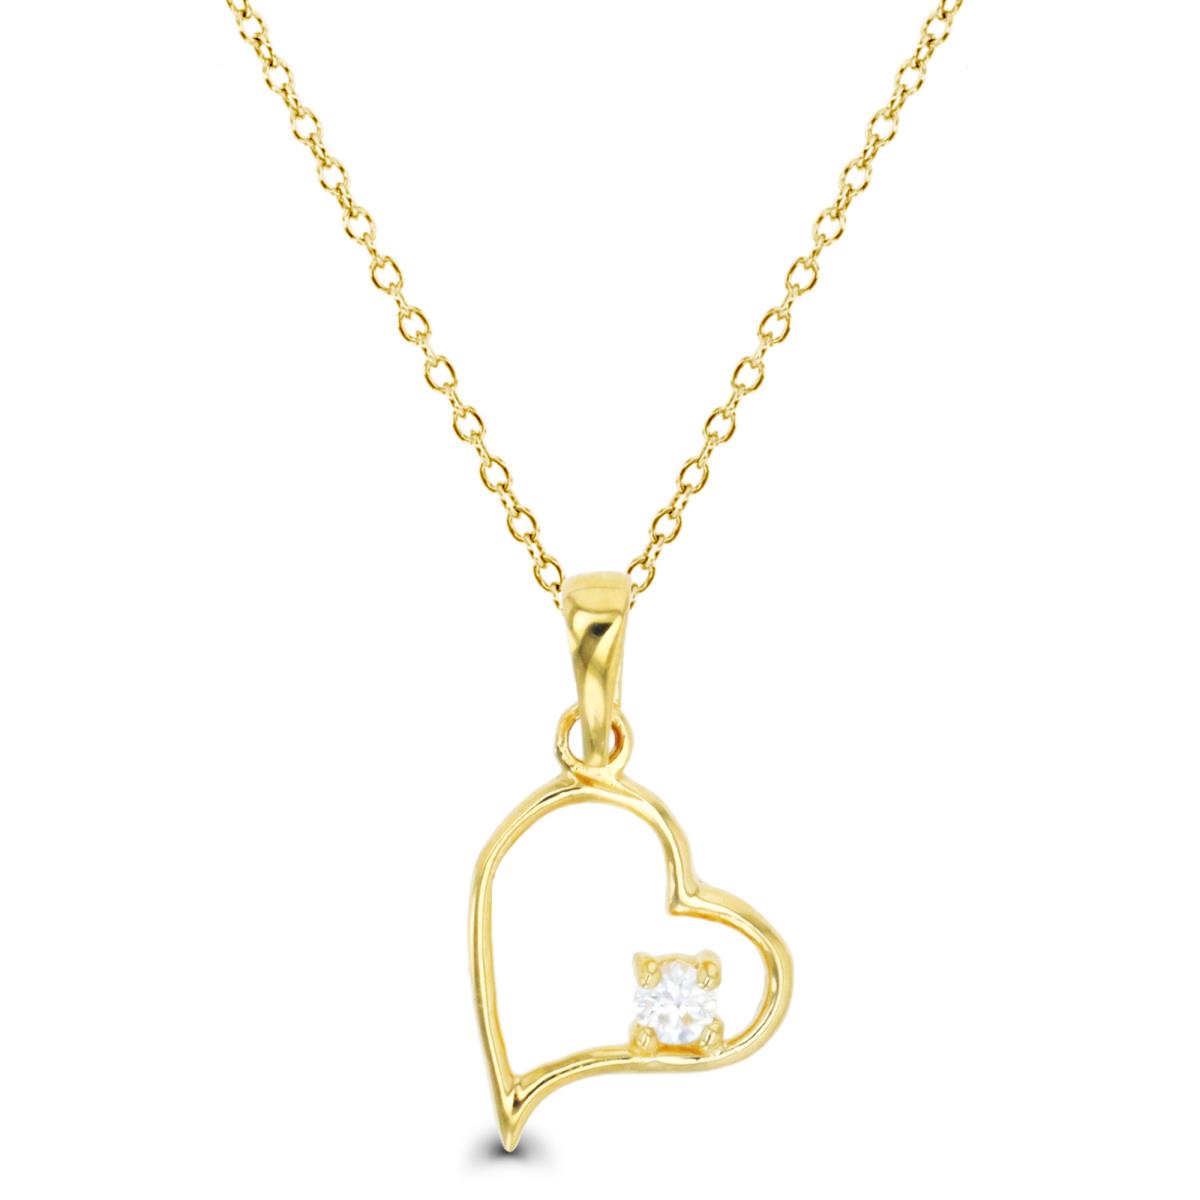 10K Yellow Gold 2.5mm RD CZ Heart 18" Necklace